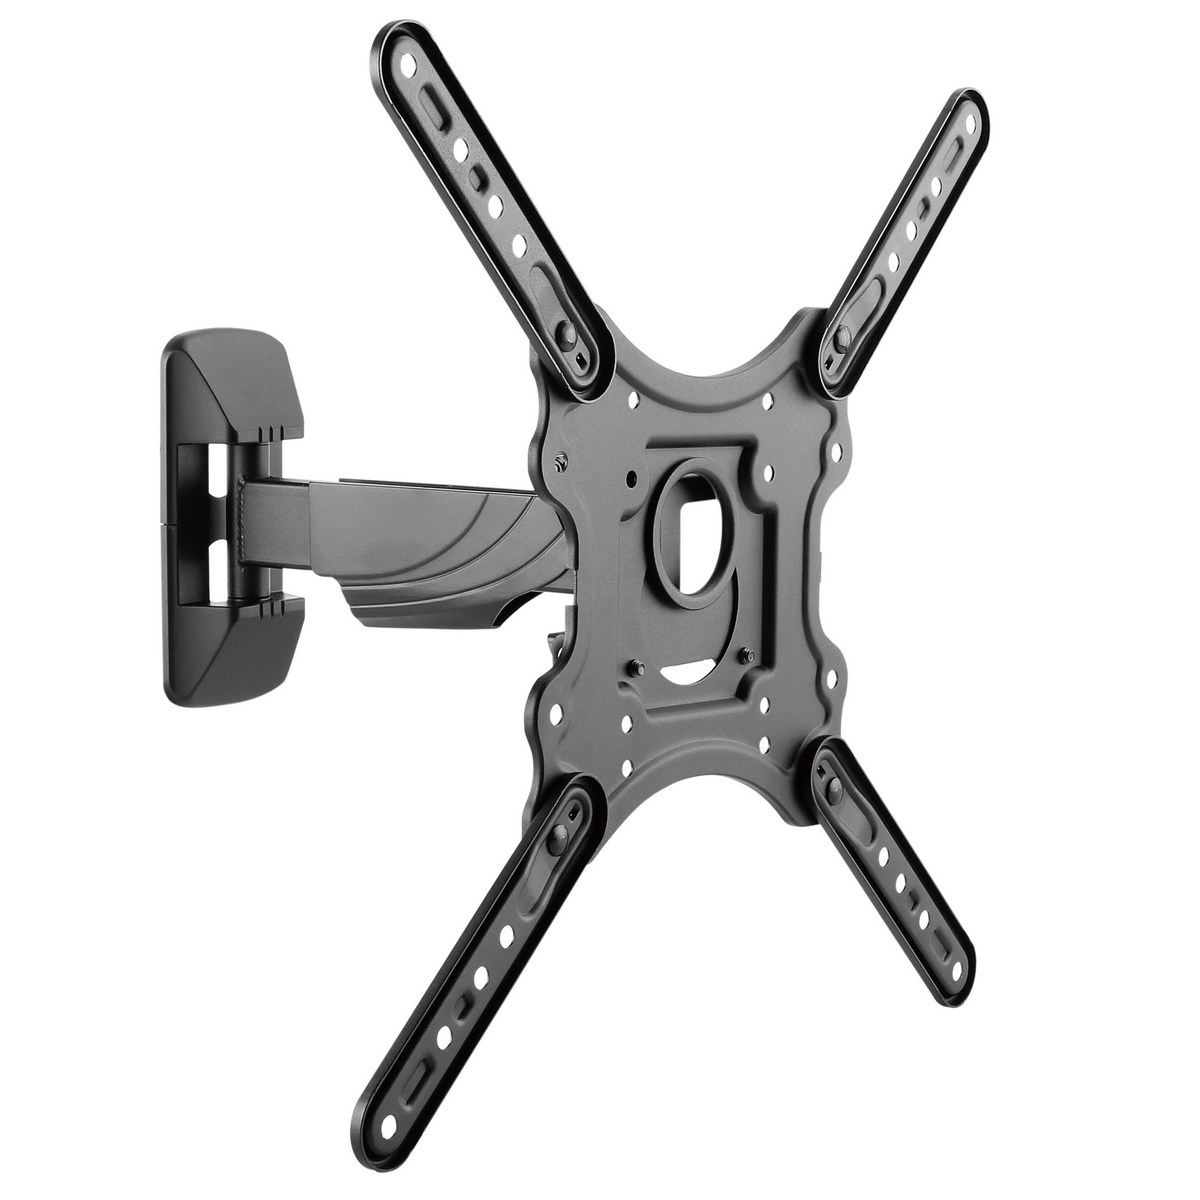 Corliving Mpm-803-l Full Motion Flat Panel Wall Mount For Tvs Up To 55"